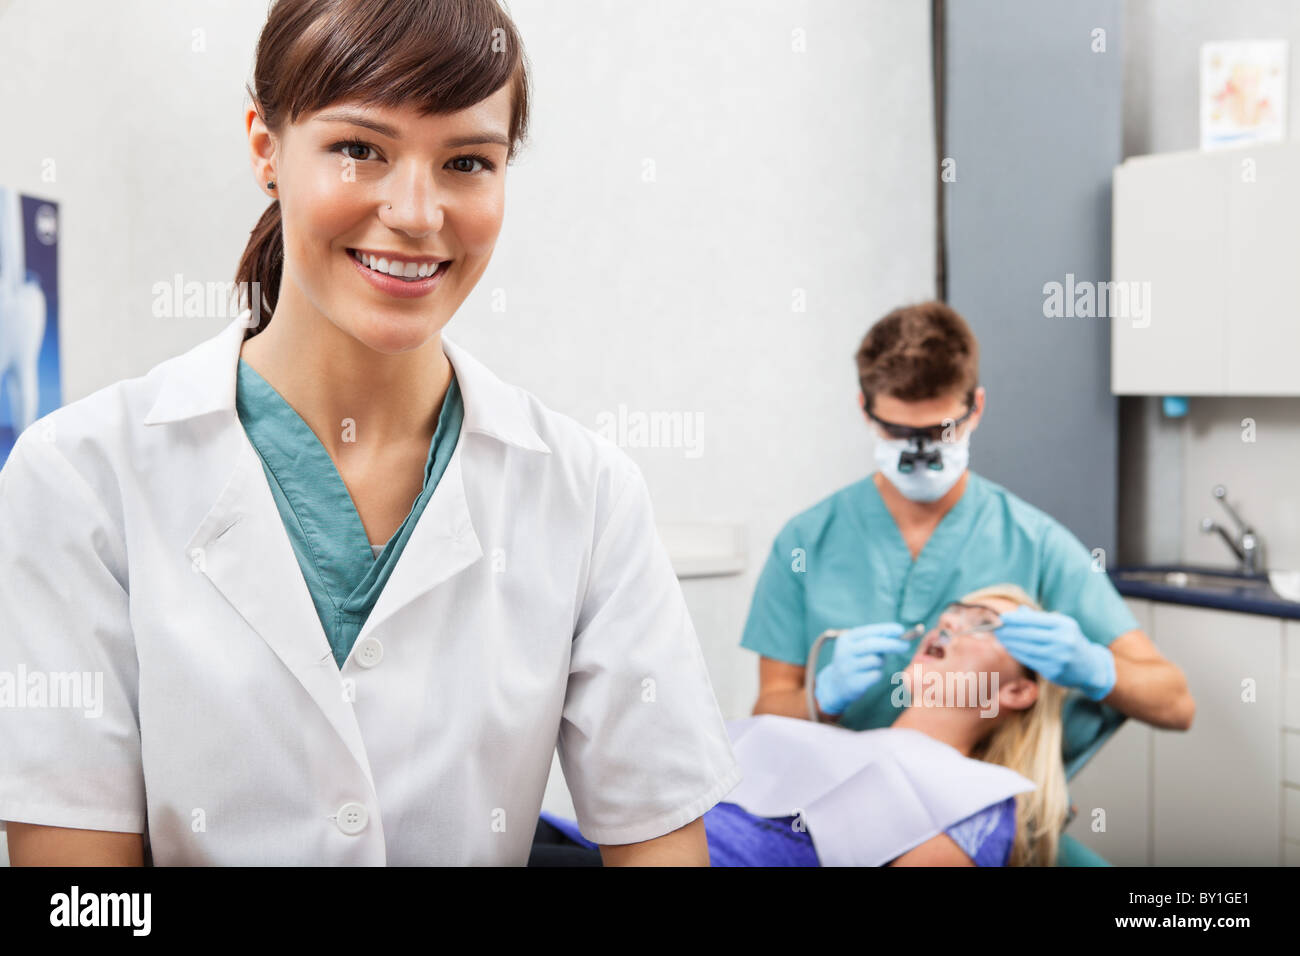 Portrait of dental assistant smiling with dentistry work in the background Stock Photo